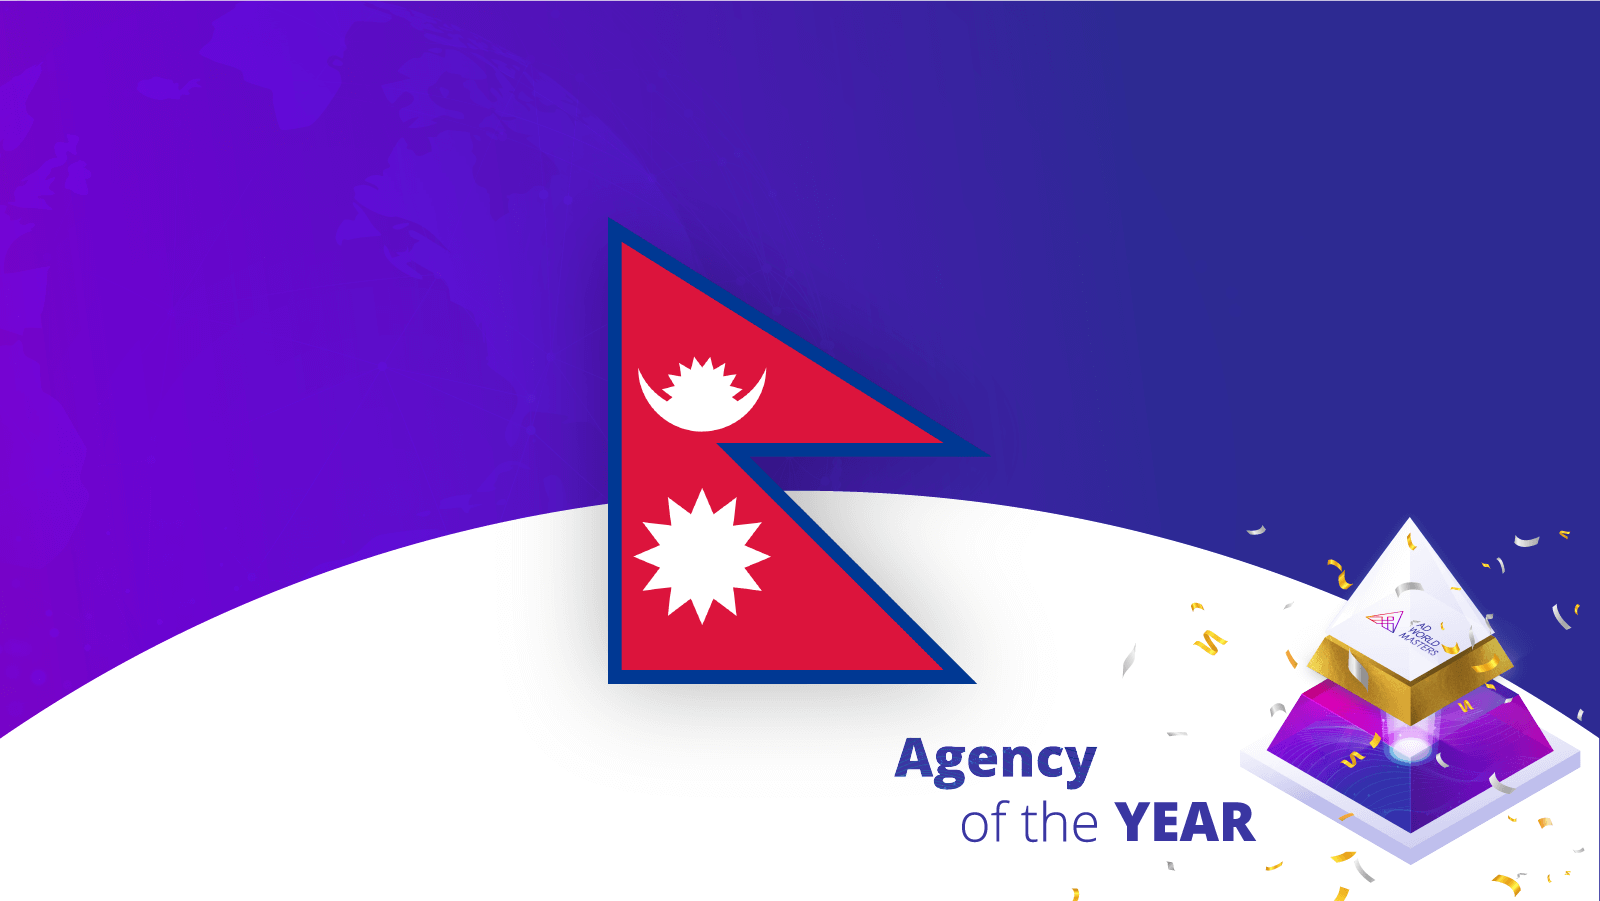 Agencies of the Year Nepal